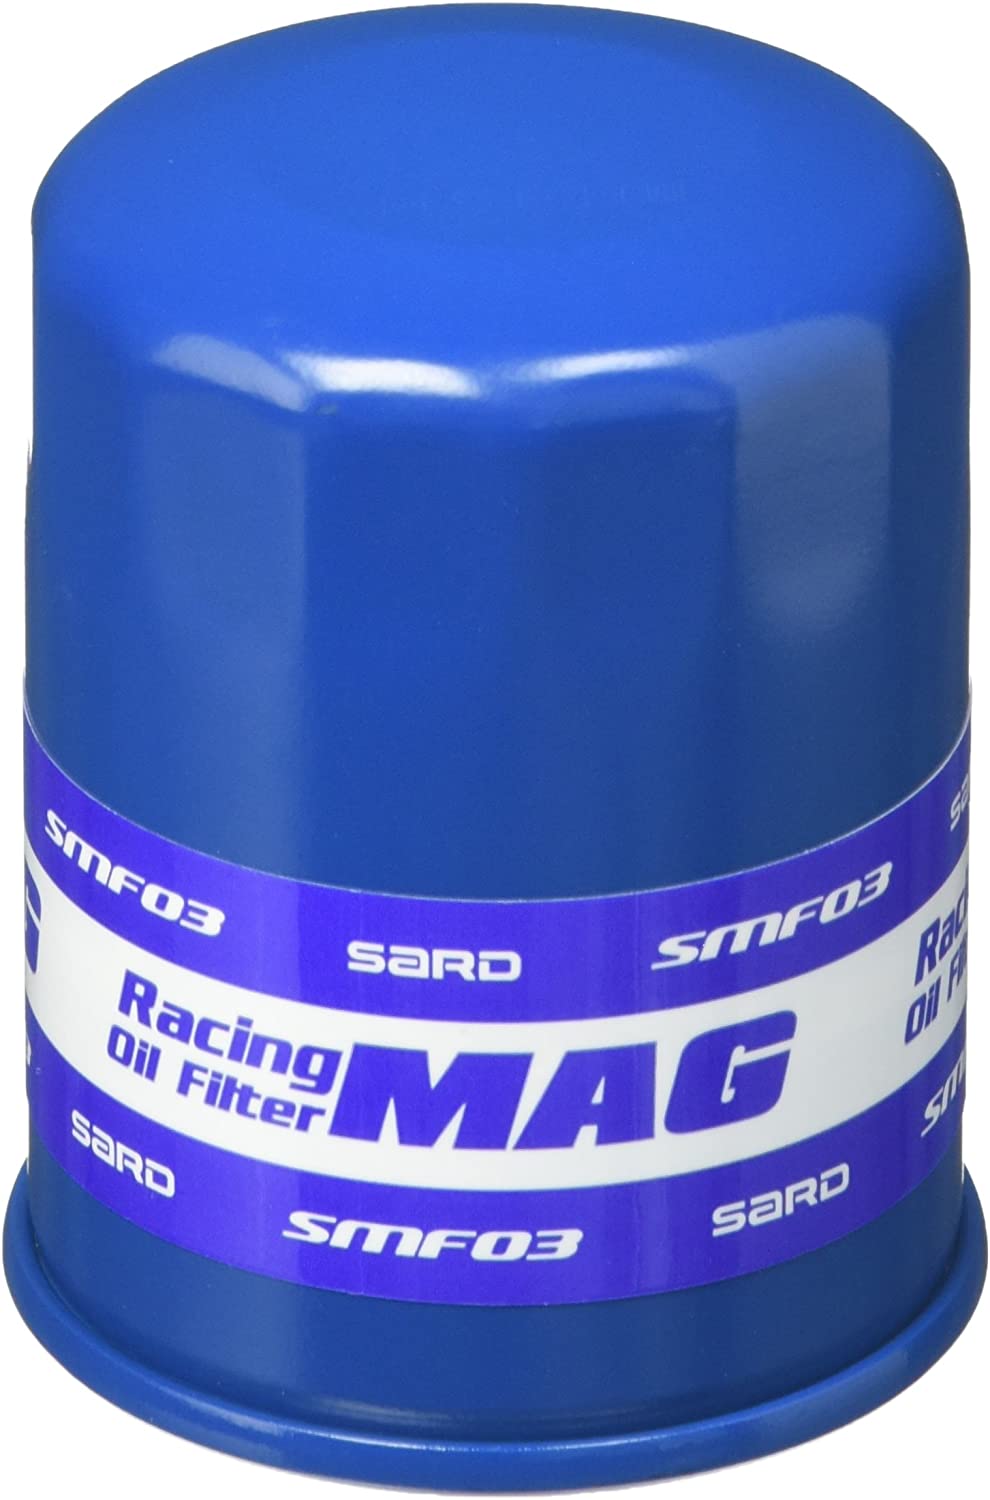 SARD RACING OIL FILTER For MARCH K11 WK11 HK11 FHK11 SMF00